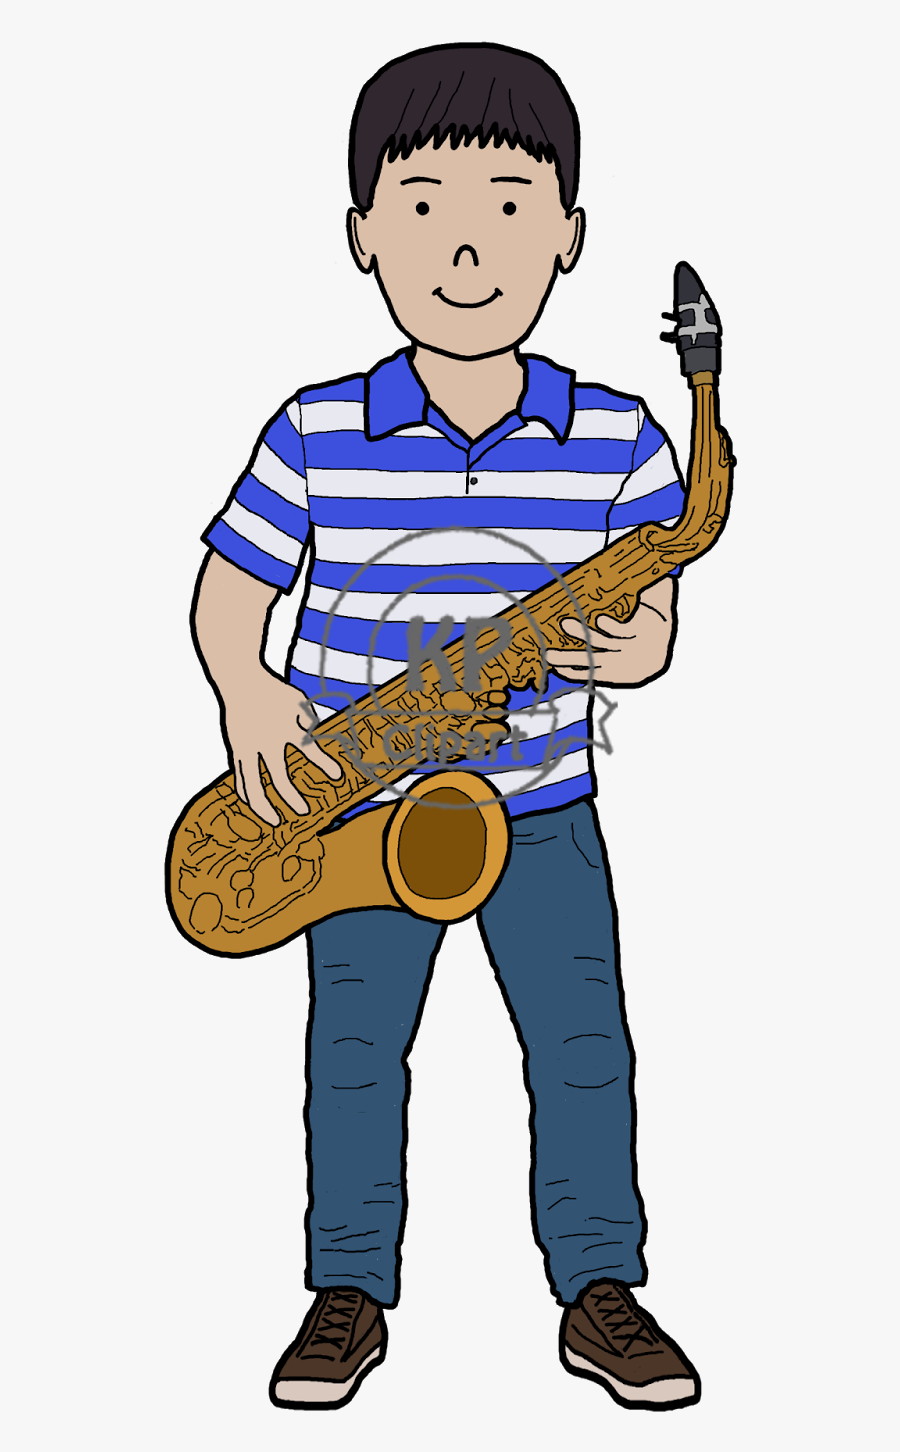 Friends Playing Music - Composer, Transparent Clipart